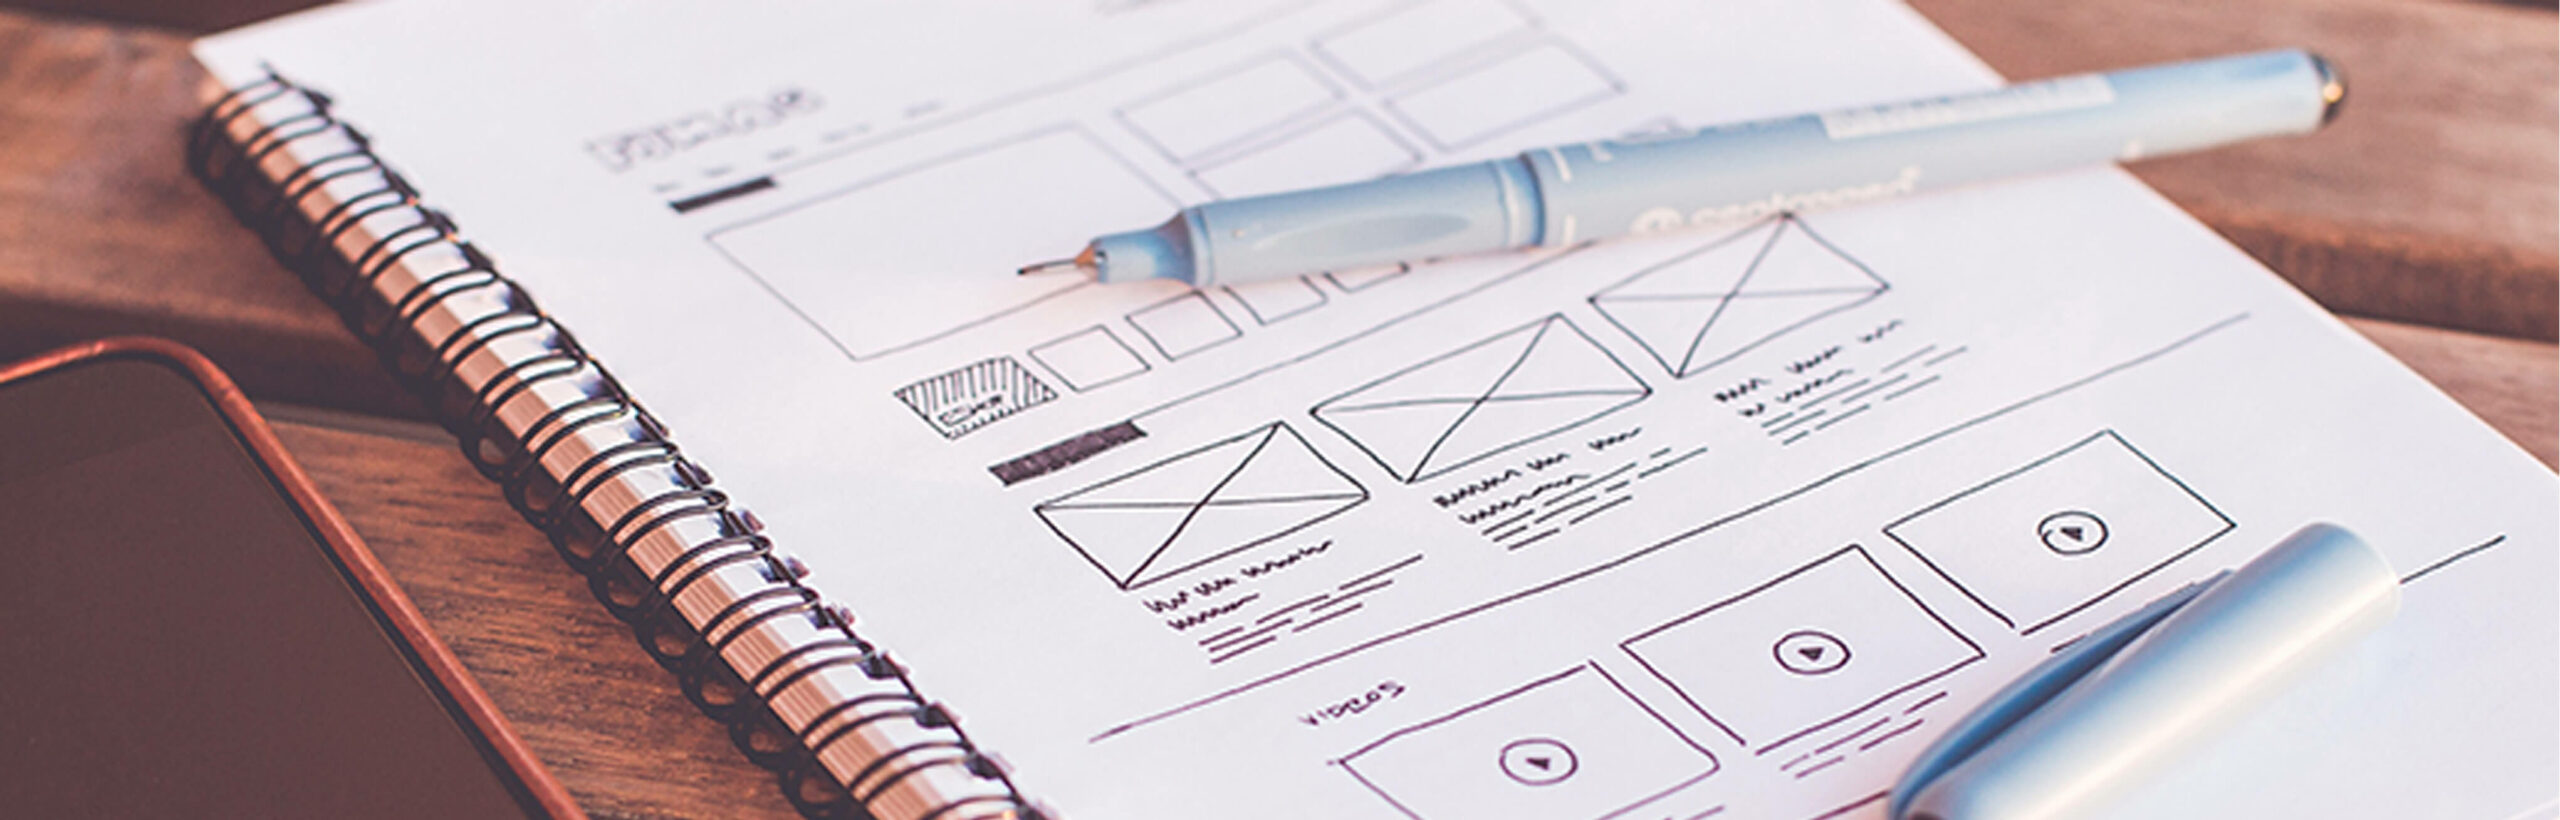 We offer wireframes for an effortless and artistic process